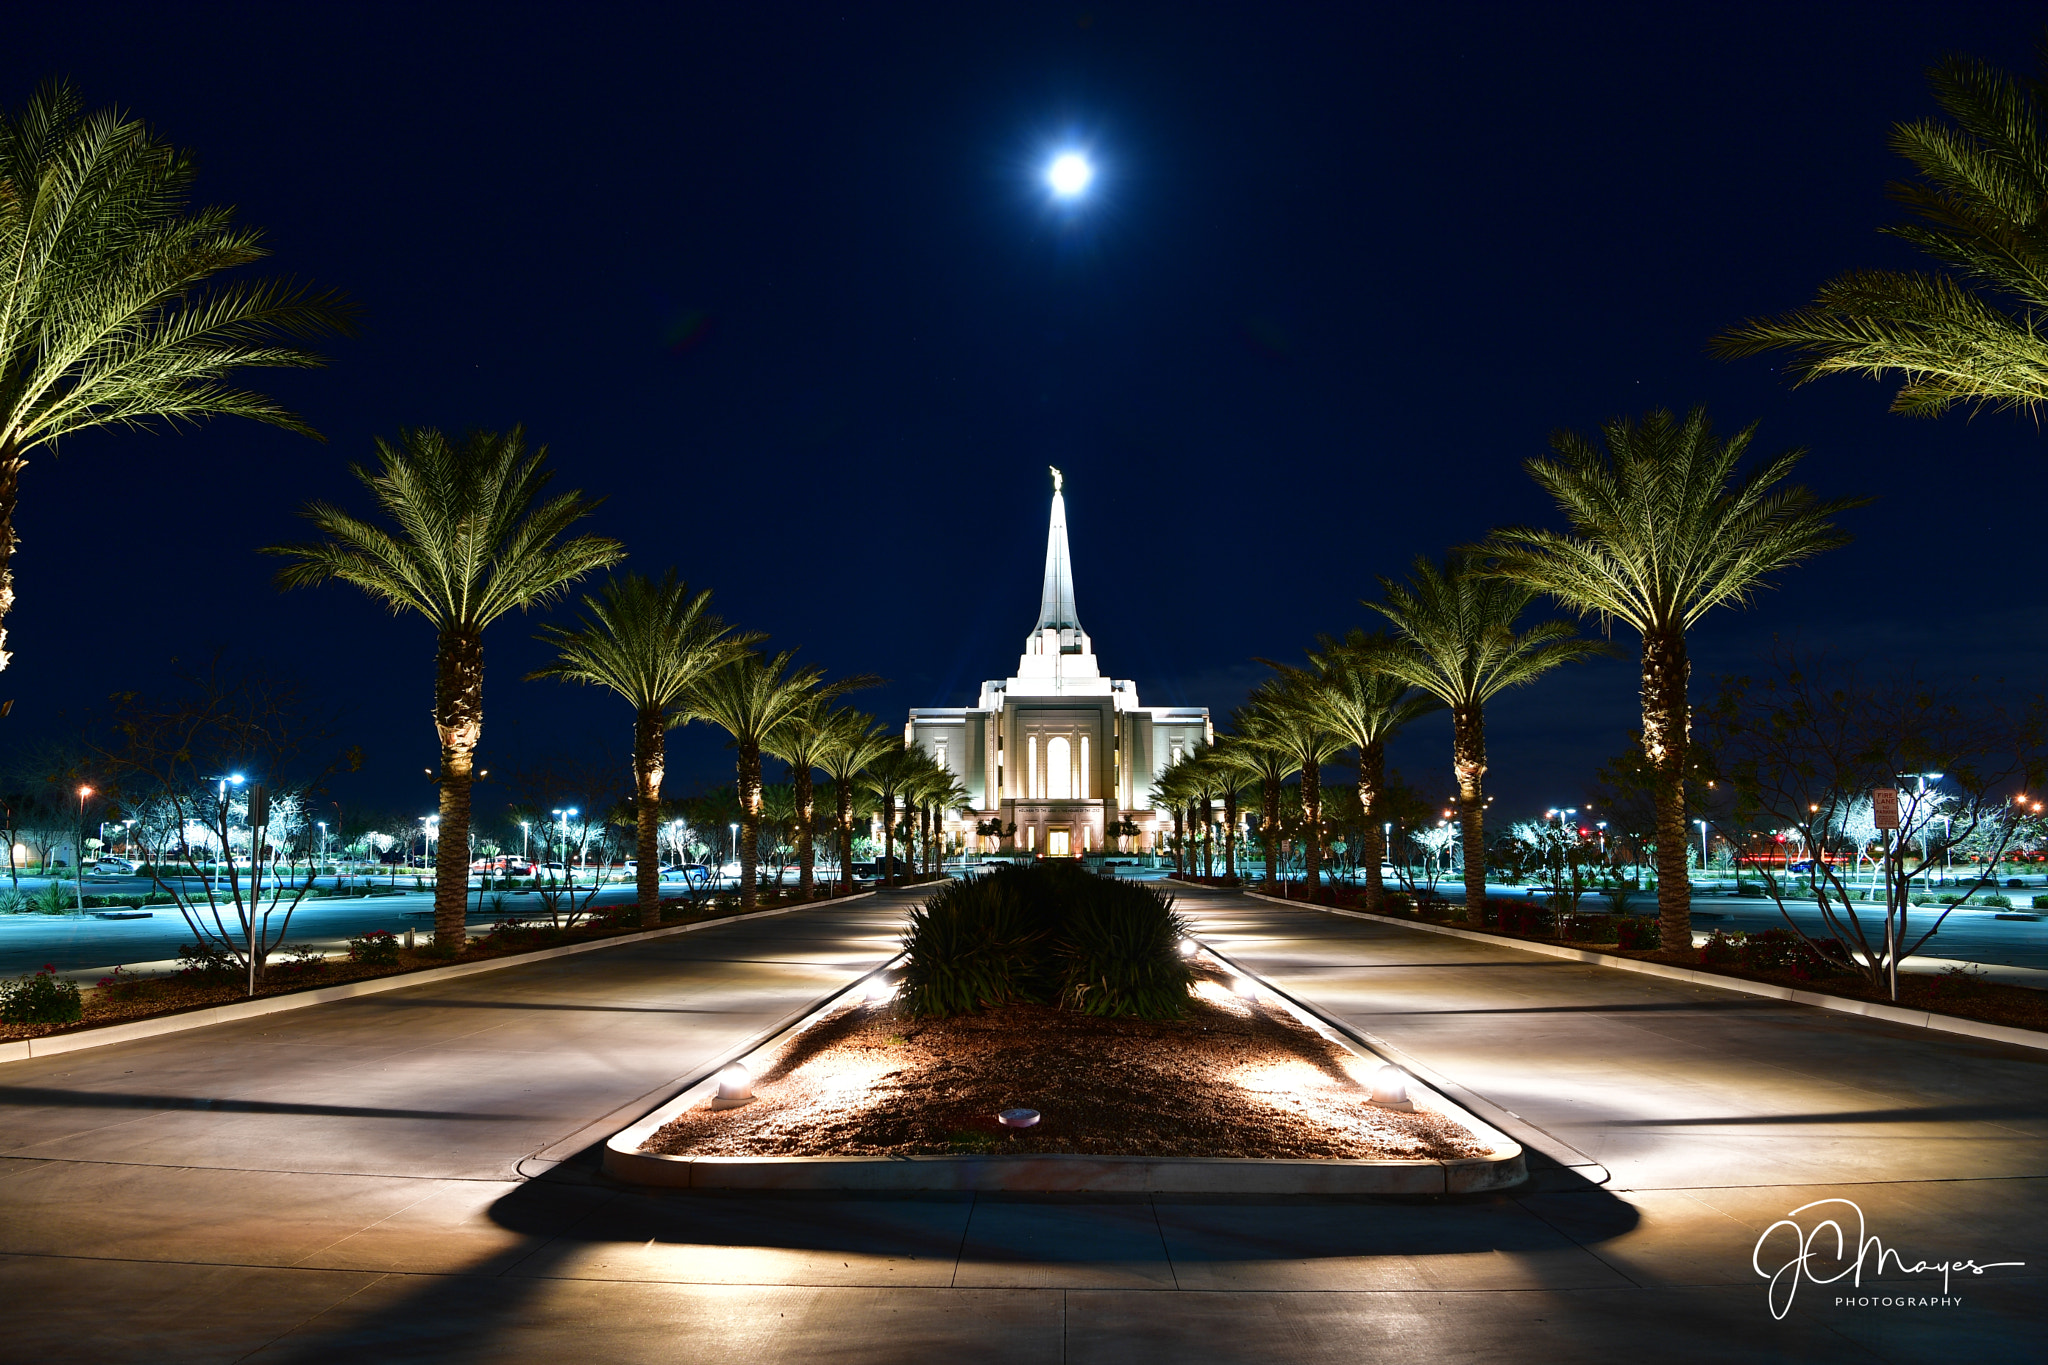 Nikon D5 + Nikon AF-S Nikkor 24-70mm F2.8E ED VR sample photo. Full moon setting over the lds temple in gilbert, arizona. photography